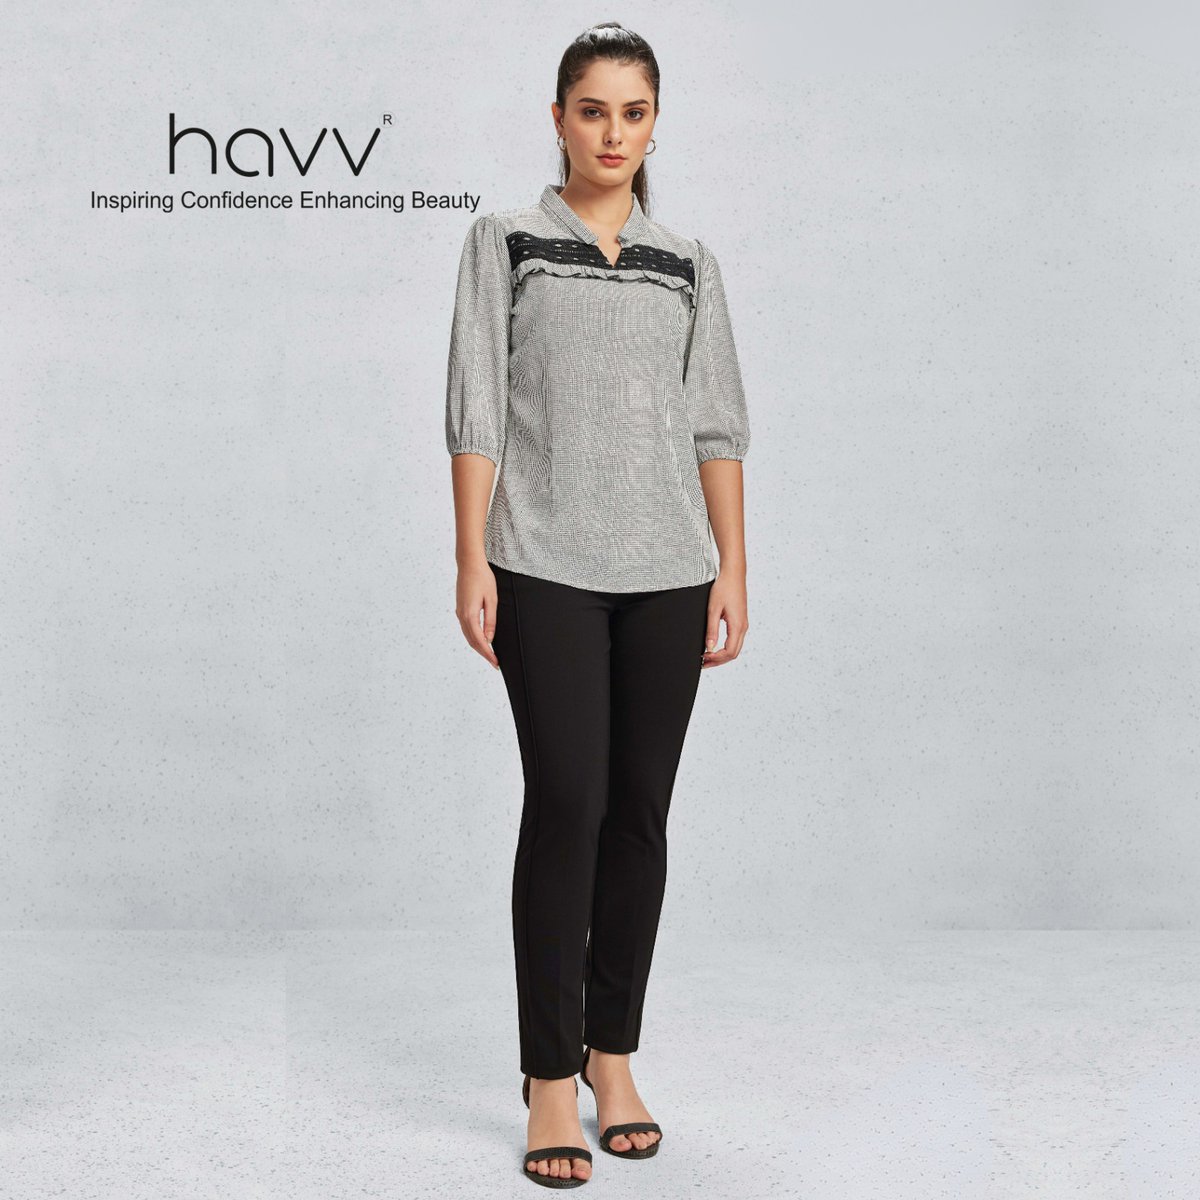 Elegance in every fold. Adorn yourself with the colours of Grey 🌞🌞

#WesternTopTrends #RanchReady #WesternBlouse #CowgirlFashion #TopOffTheRange #StylishShirts #FrontierFashion #TopNotchWestern #RodeoReady #WesternChic #havv